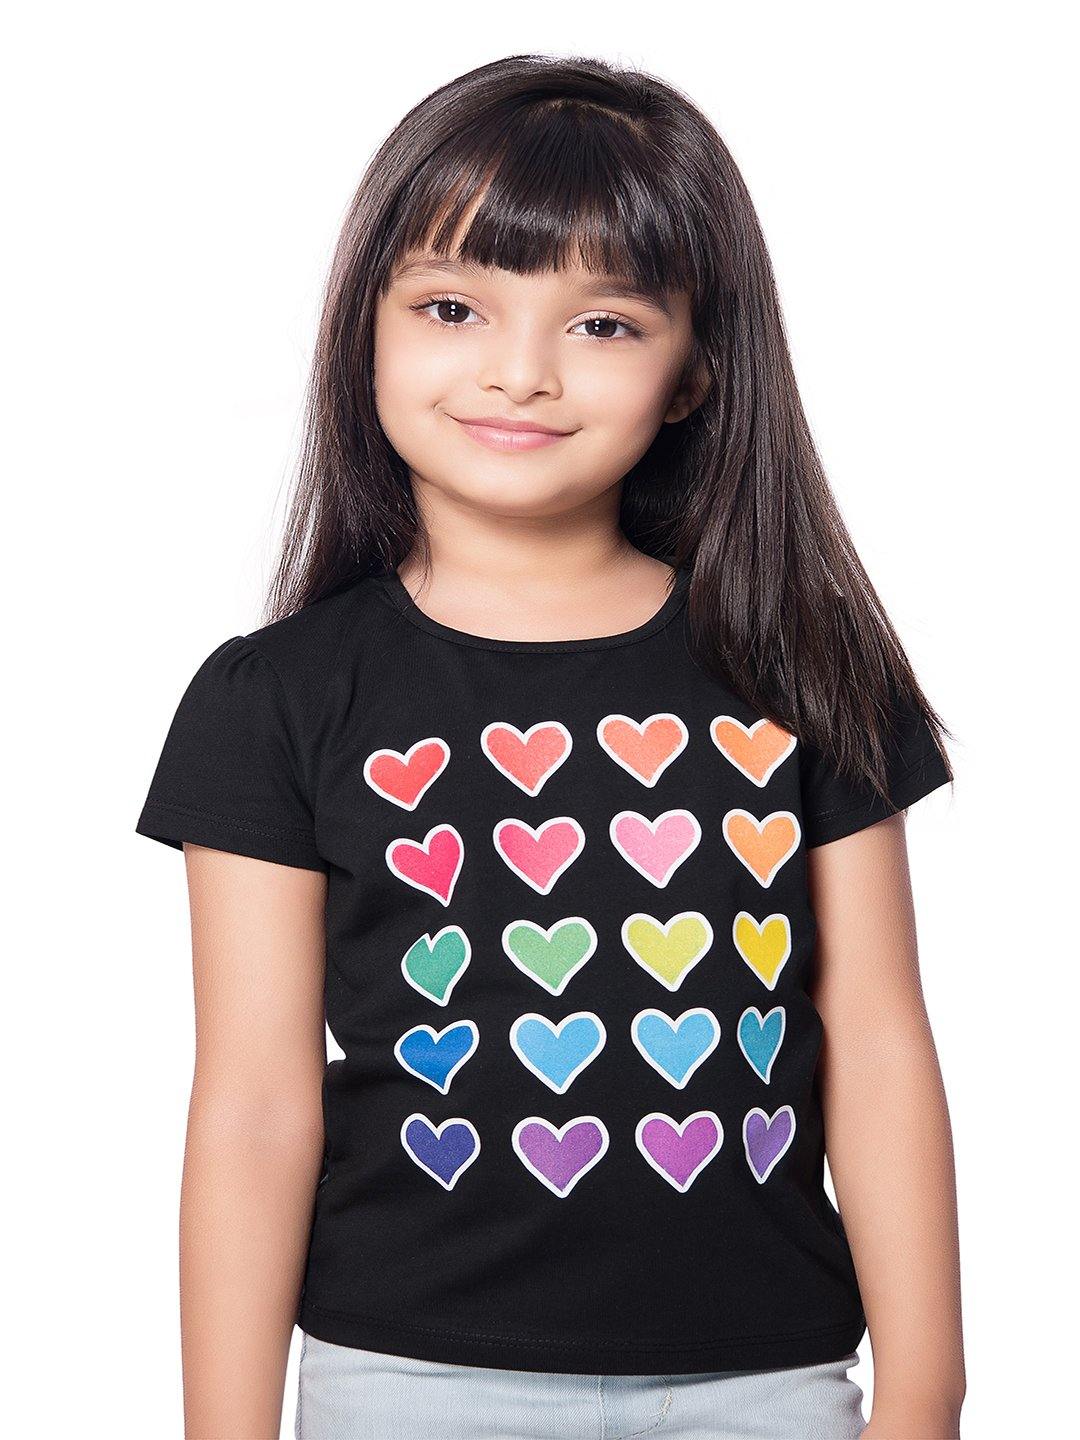 Tiny Baby Black Colored Top - T-107 Black - TINY BABY INDIA shop.tinybaby.in